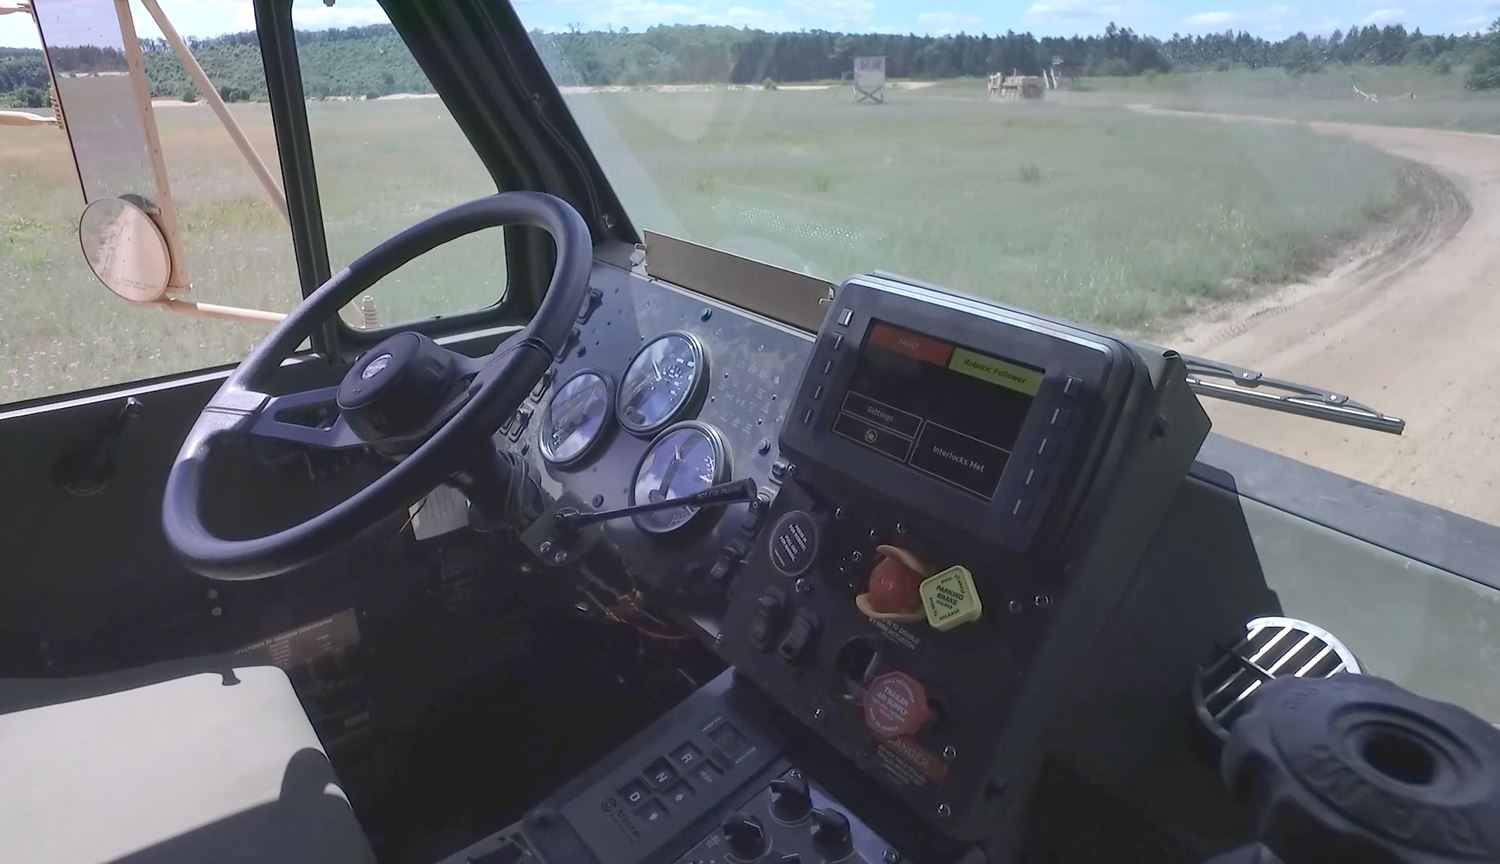 Inside the Leader Follower Program vehicle in action with no operator